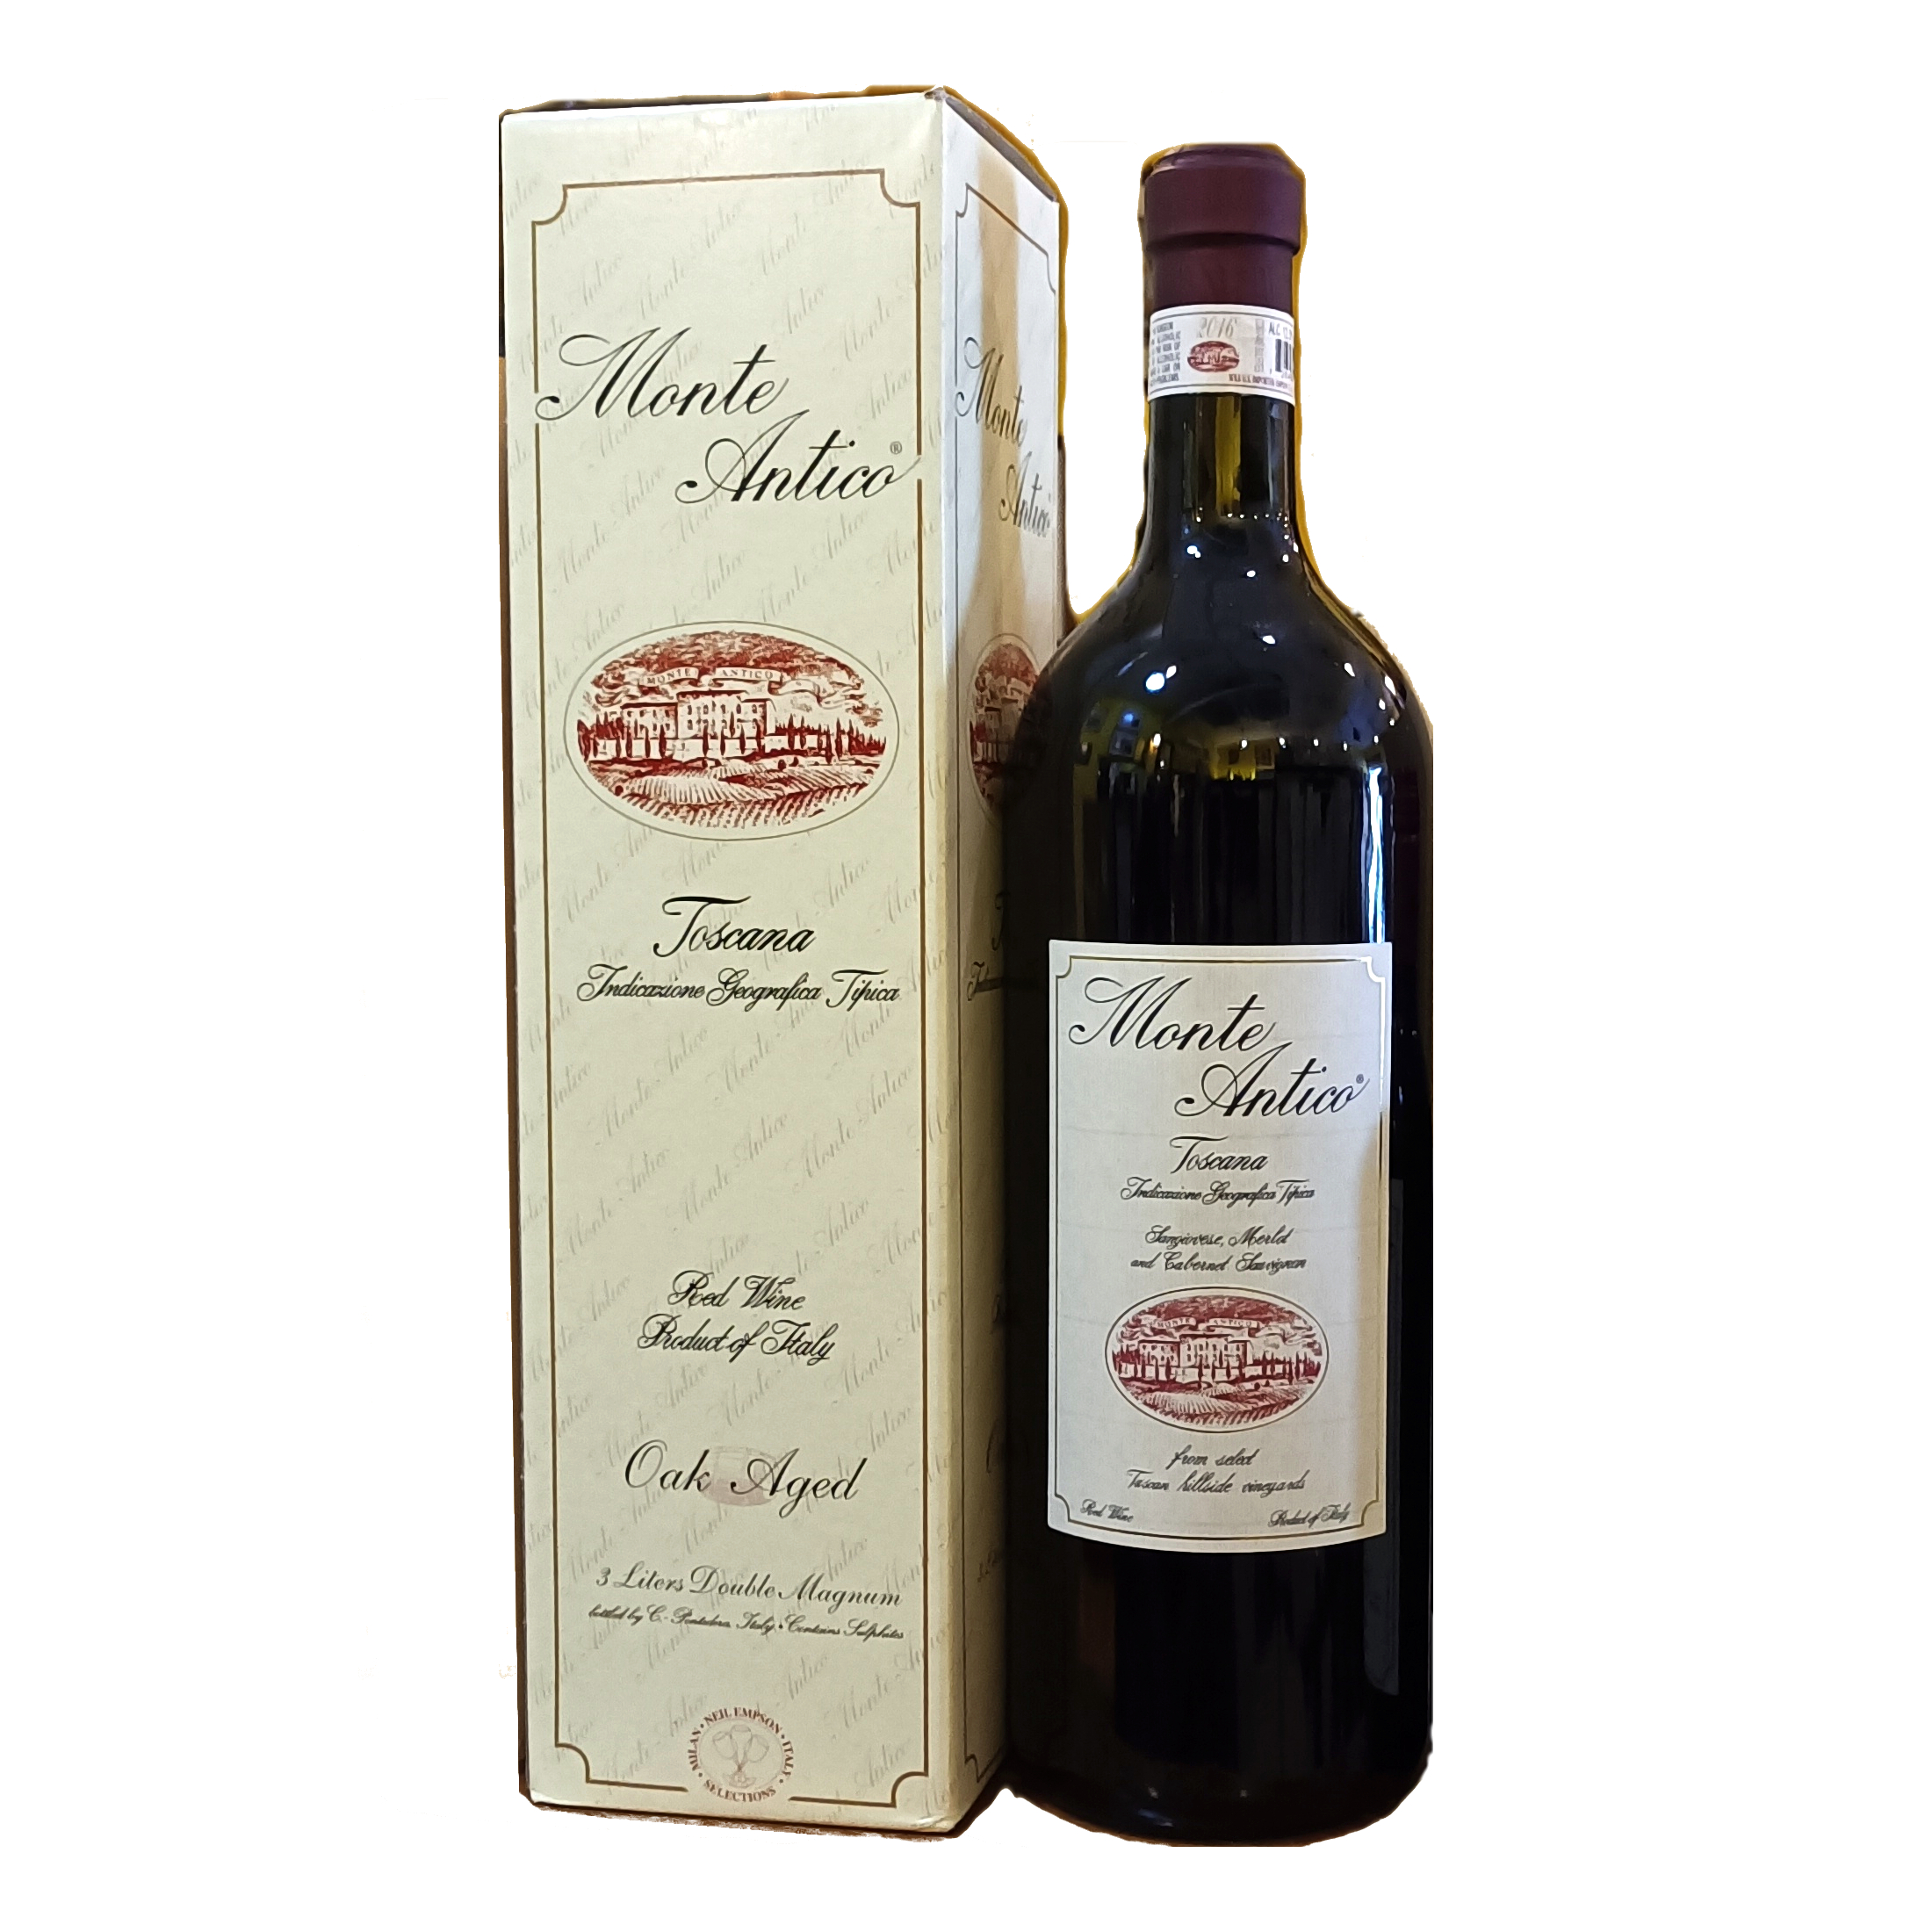 Monte Antico Toscana 2016 IGT Super Tuscan Red Wine 3L Double Magnum – Tuscany, Italy